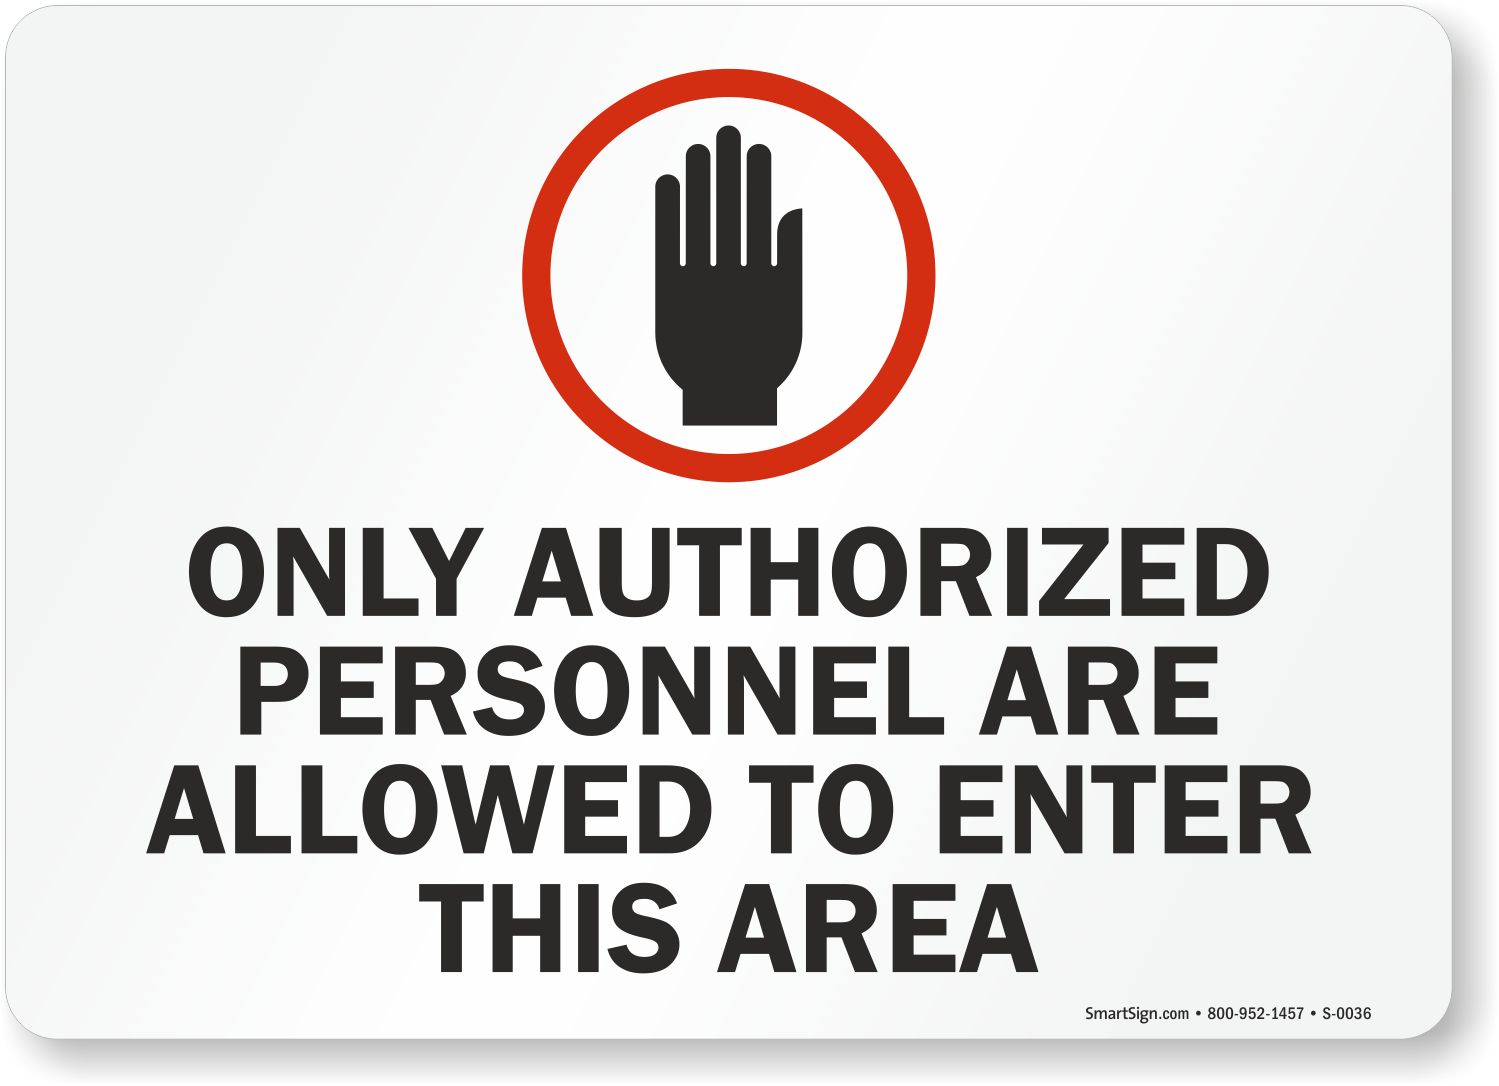 Are you allowed. Be allowed to. Authorized personnel. Authorized only.